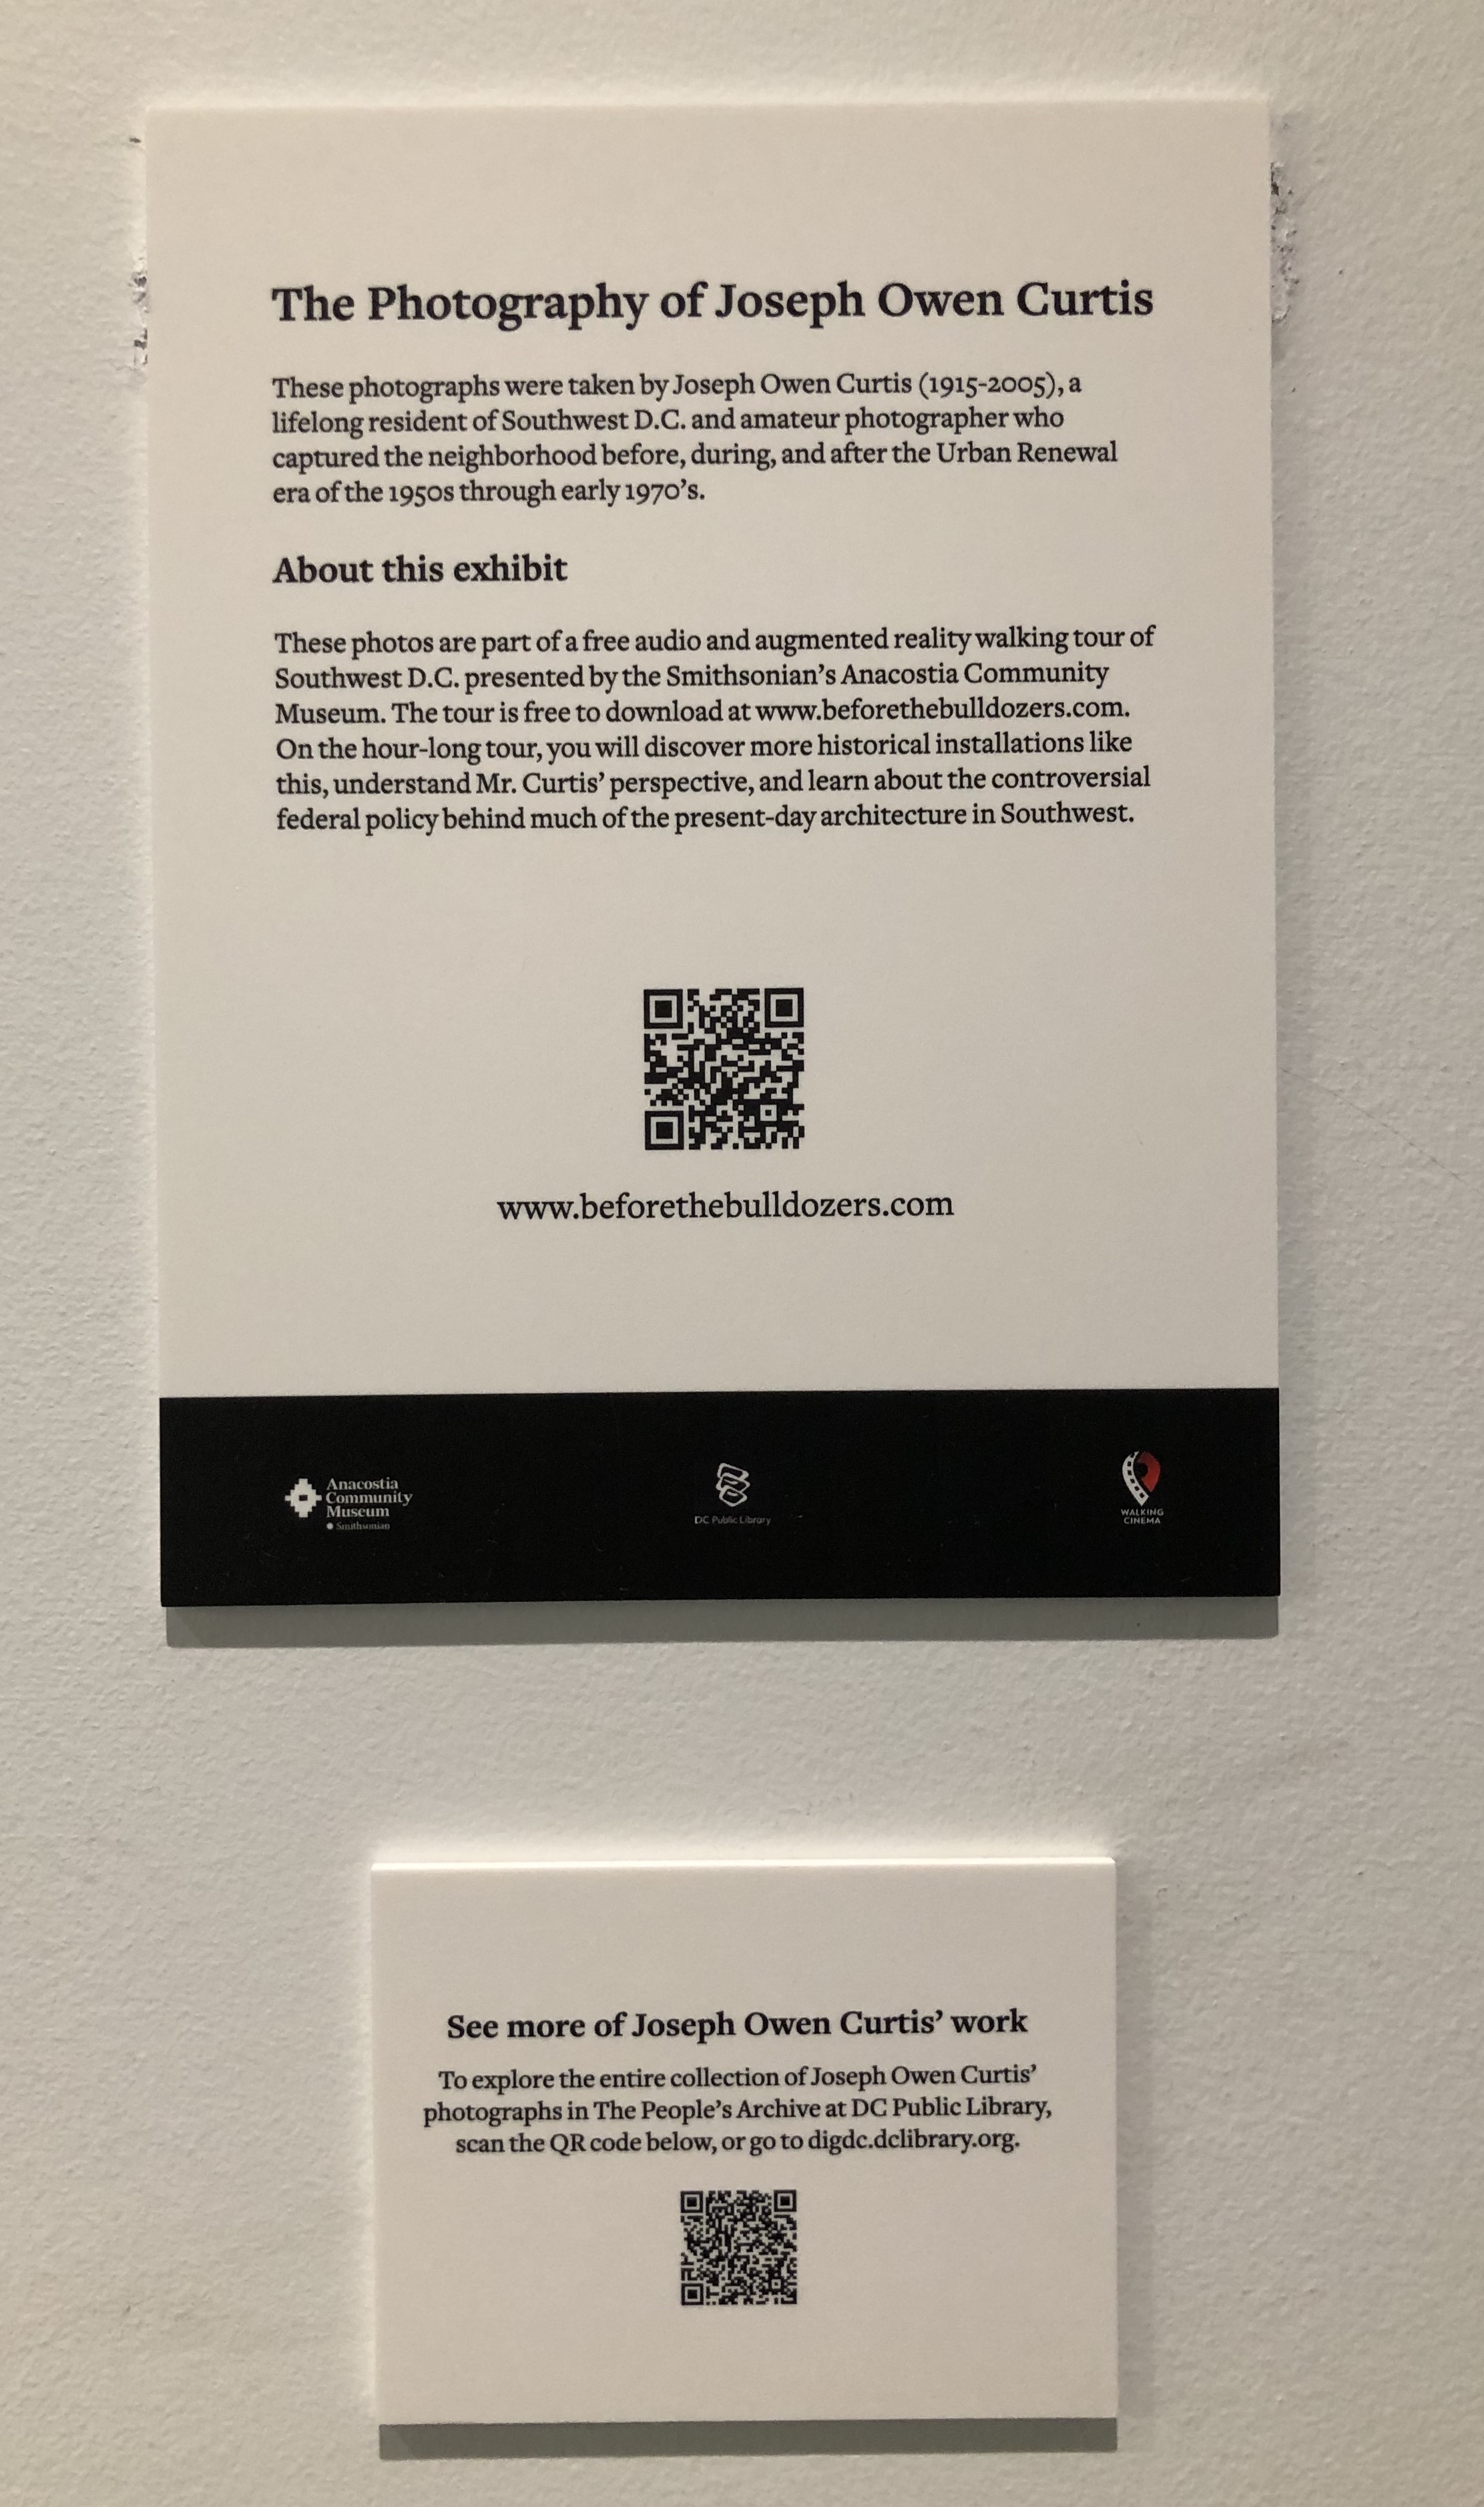 Photograph of two white wall plaques. The larger plaque has a heading that reads “Photography of Joseph Owen Curtis,” and a square QR code. The smaller plaque reads “See more of Joseph Owen Curtis’s work” and has another small QR code.